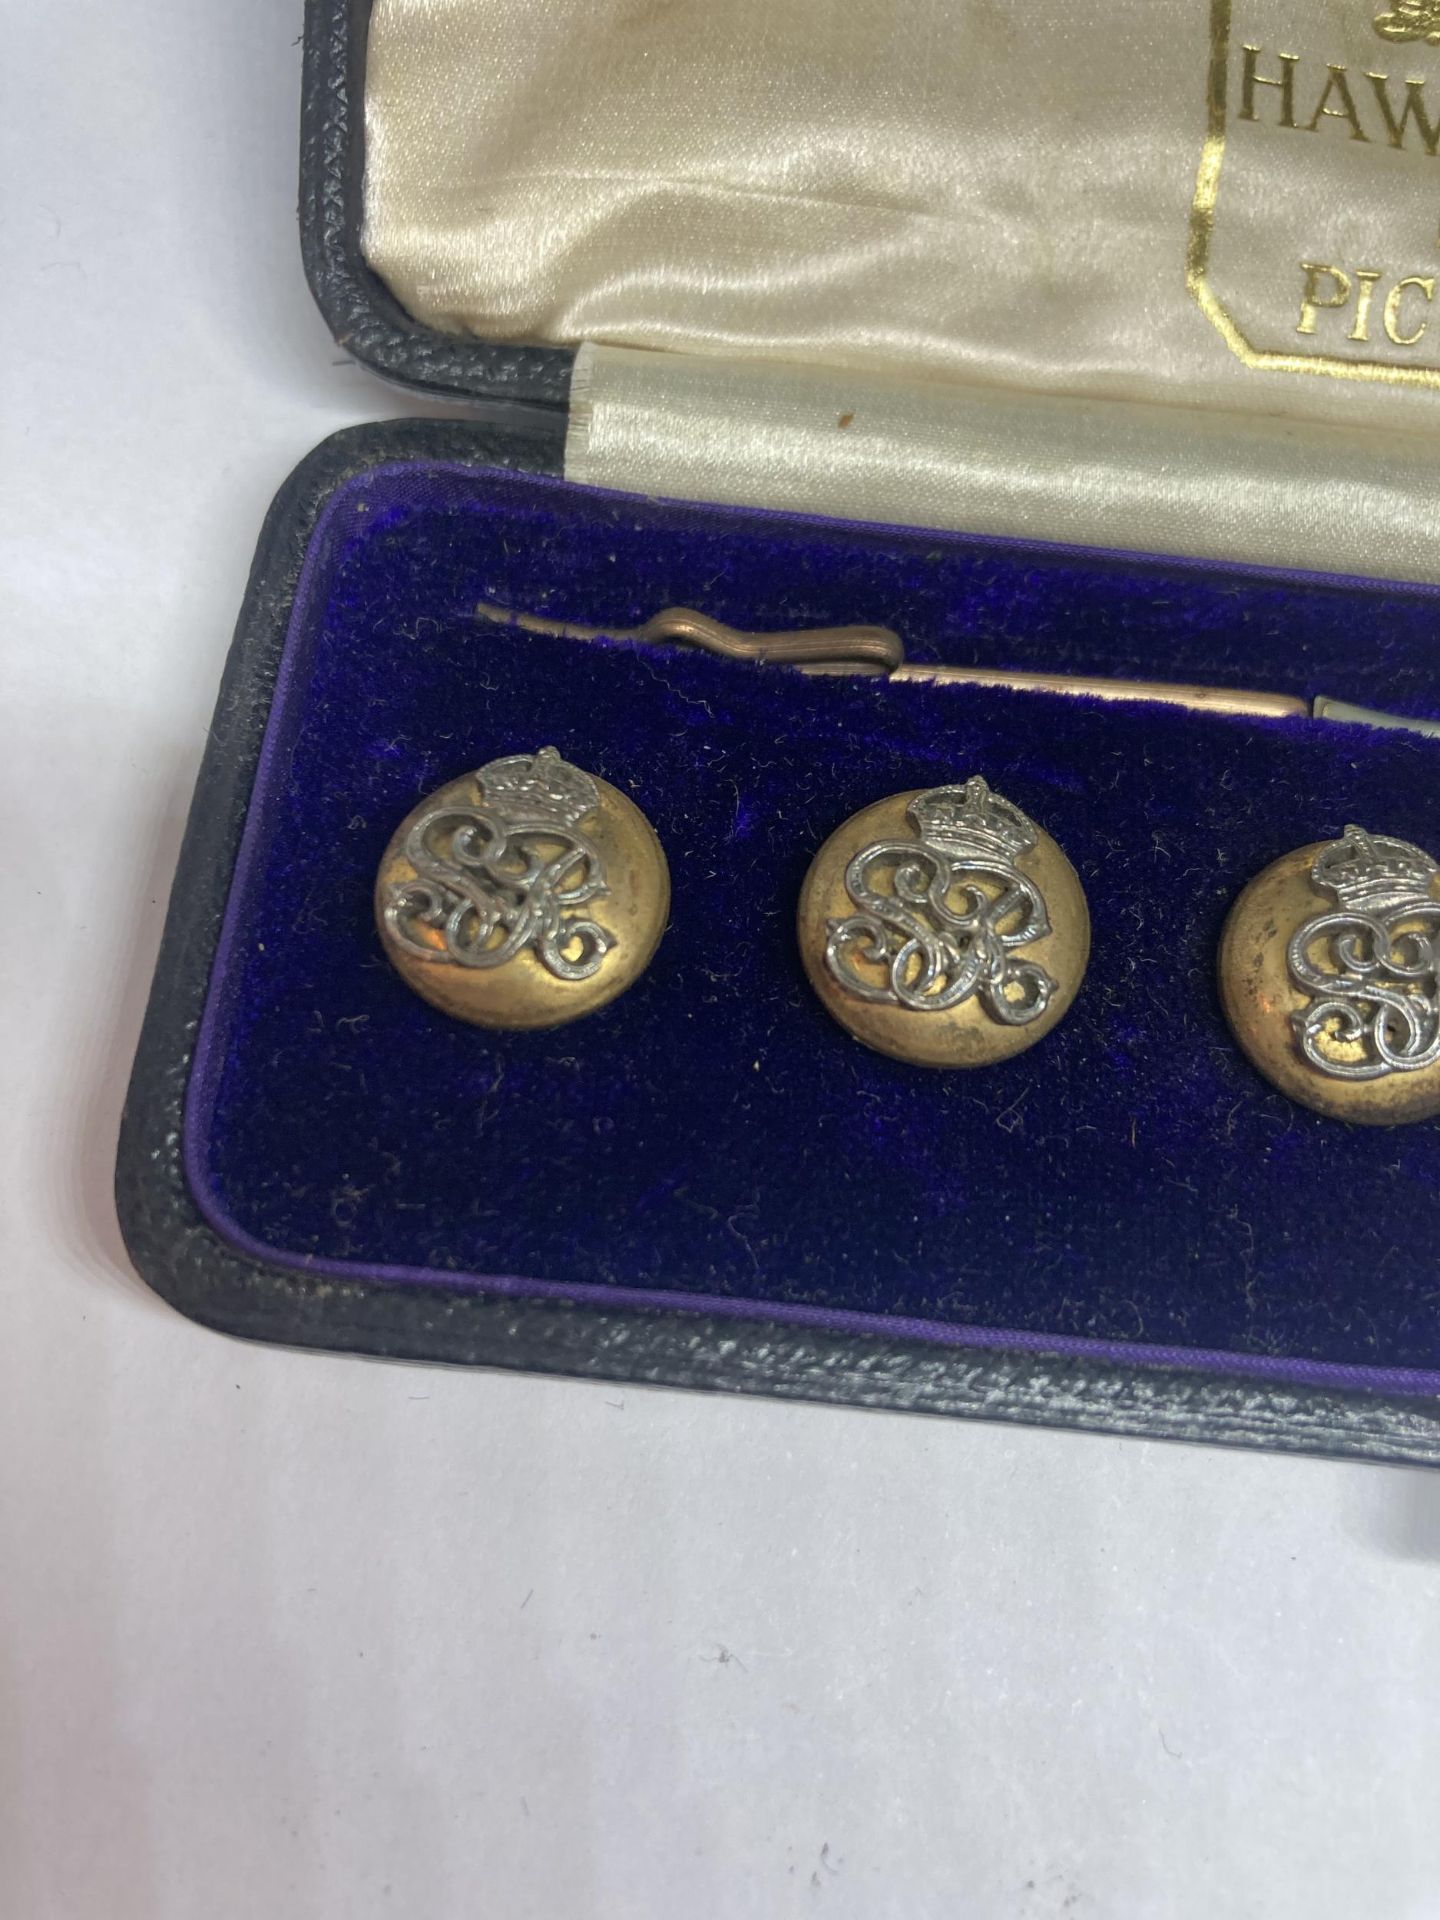 A SET OF SIX HAWKES & CO NO 14 PICCADILLY VINTAGE BUTTONS IN ORIGINAL PRESENTATION BOX - Image 3 of 3